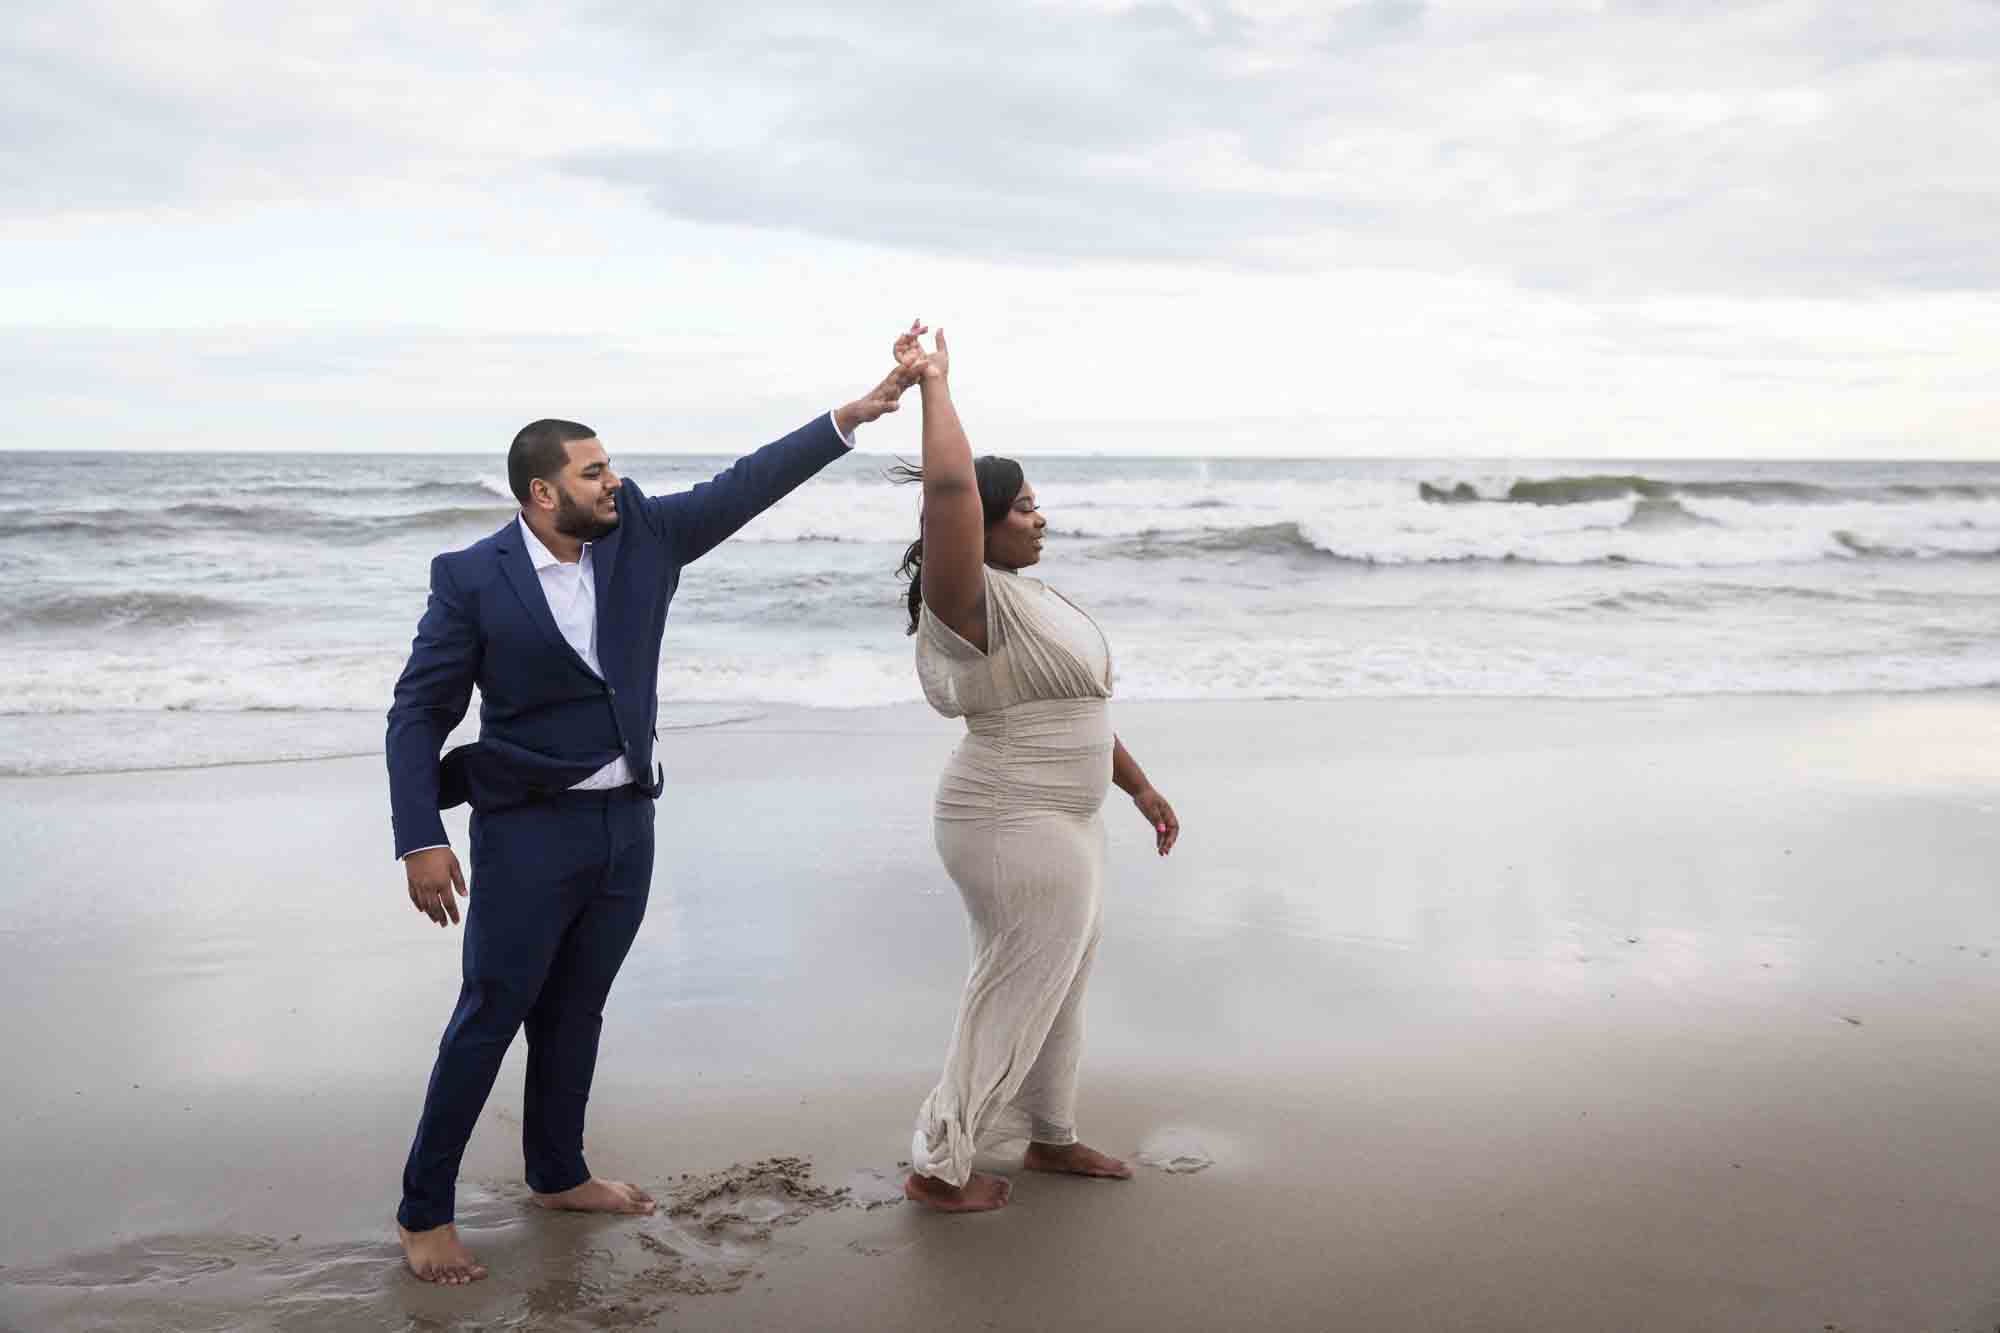 Couple dancing in front of waves for an article on how to plan the perfect beach engagement photo shoot